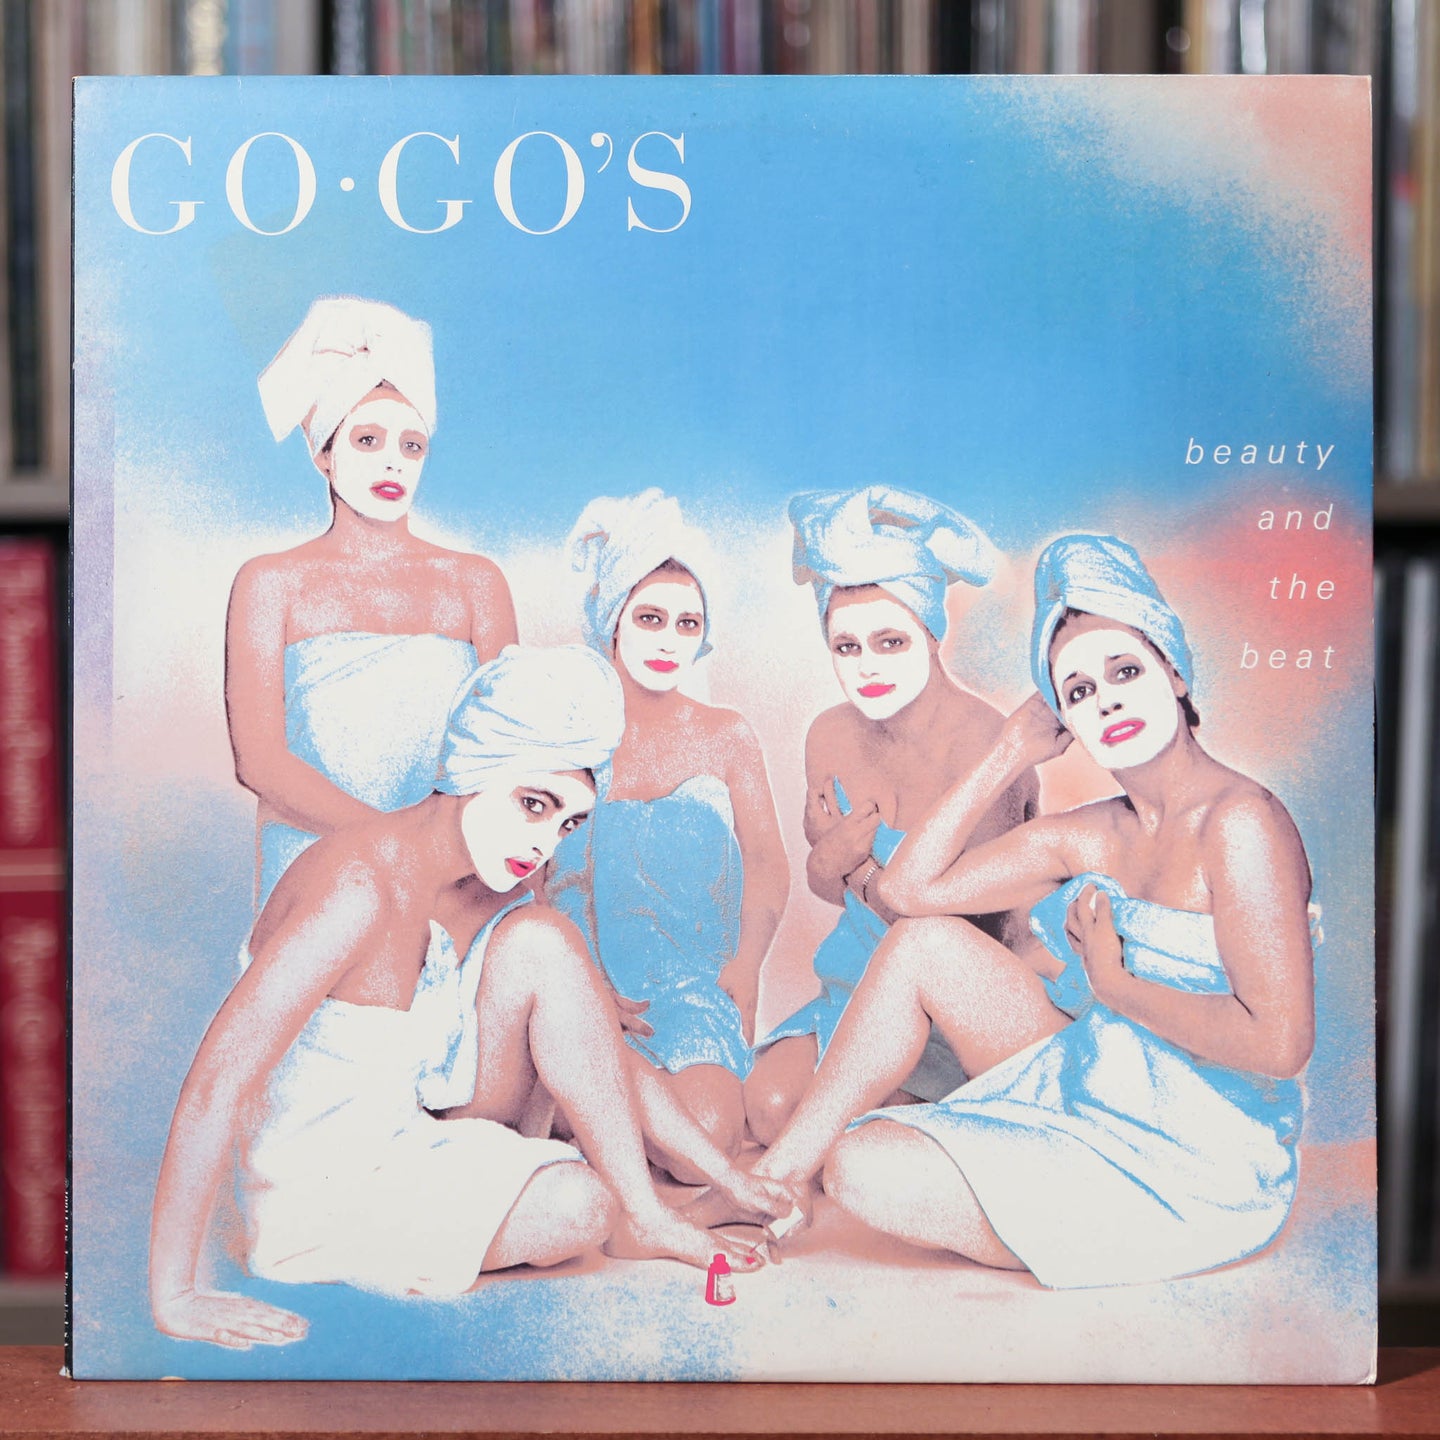 Go Go's - Beauty And The Beat - 1981 IRS, EX/VG+